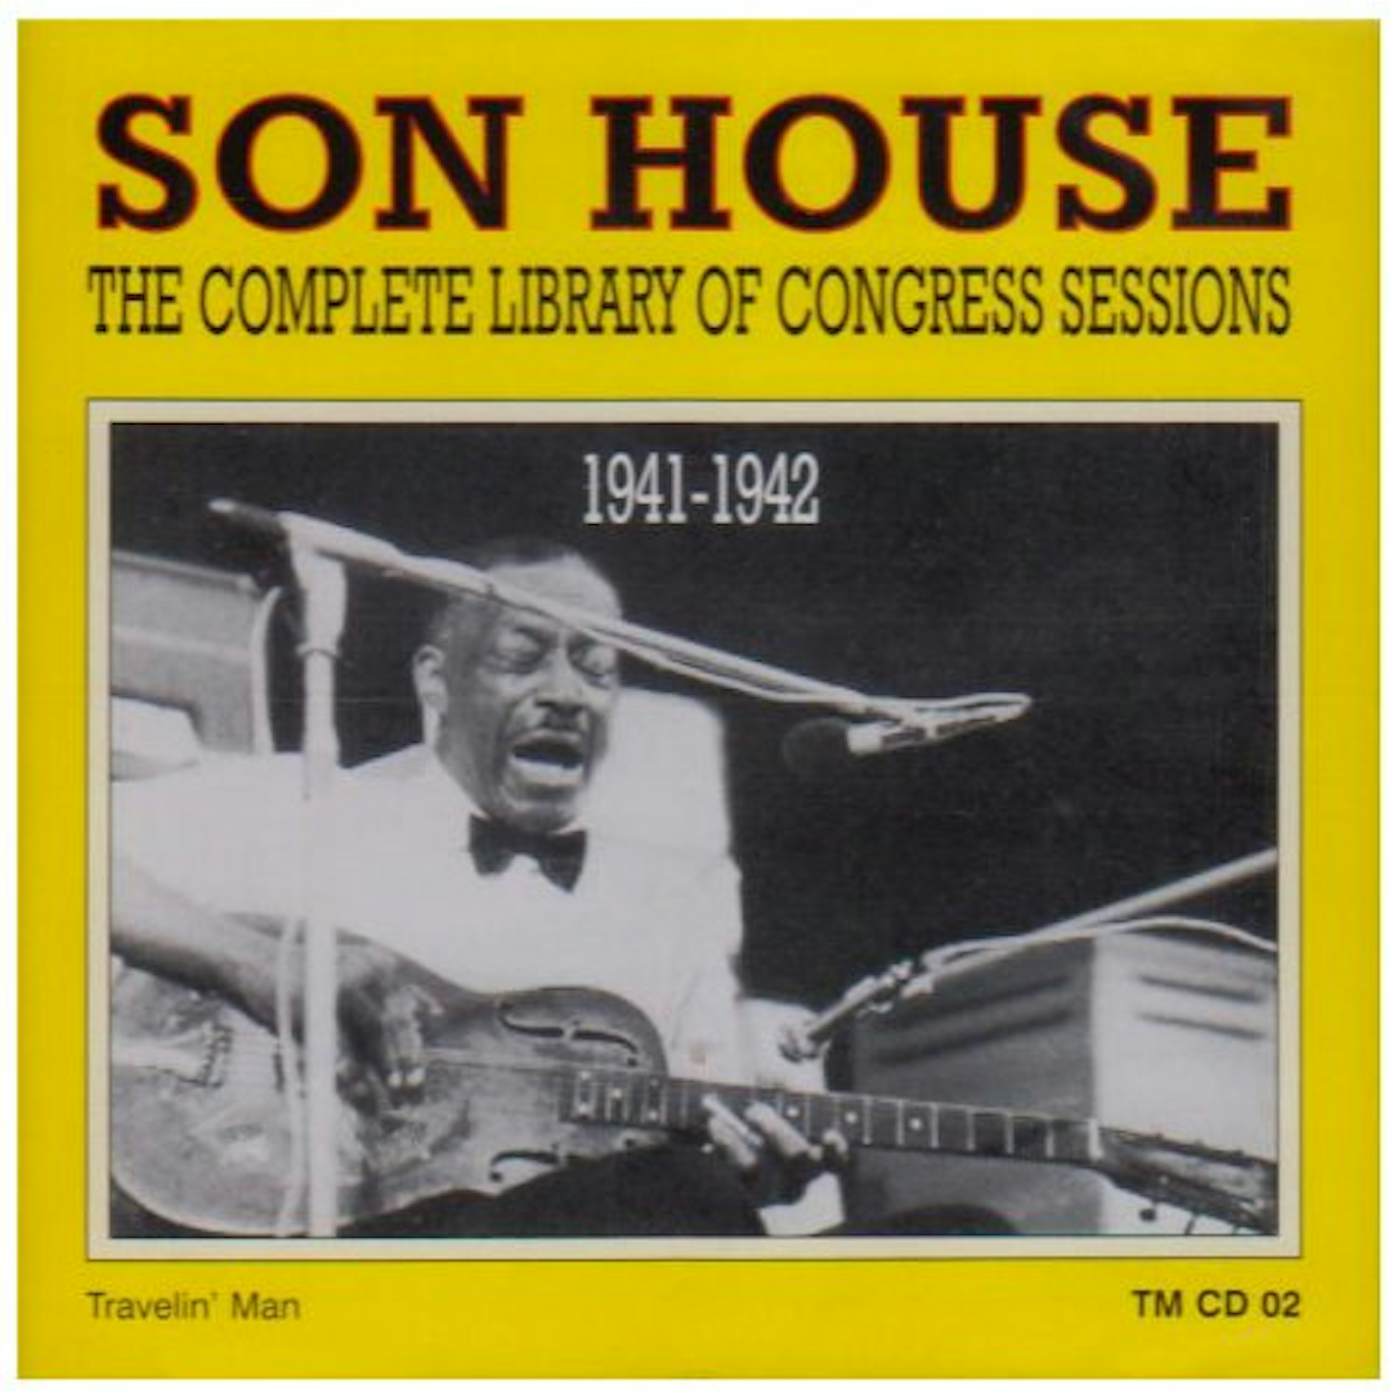 Son House COMPLETE LIBRARY OF CONGRESS CONGRESS 1941-42 CD